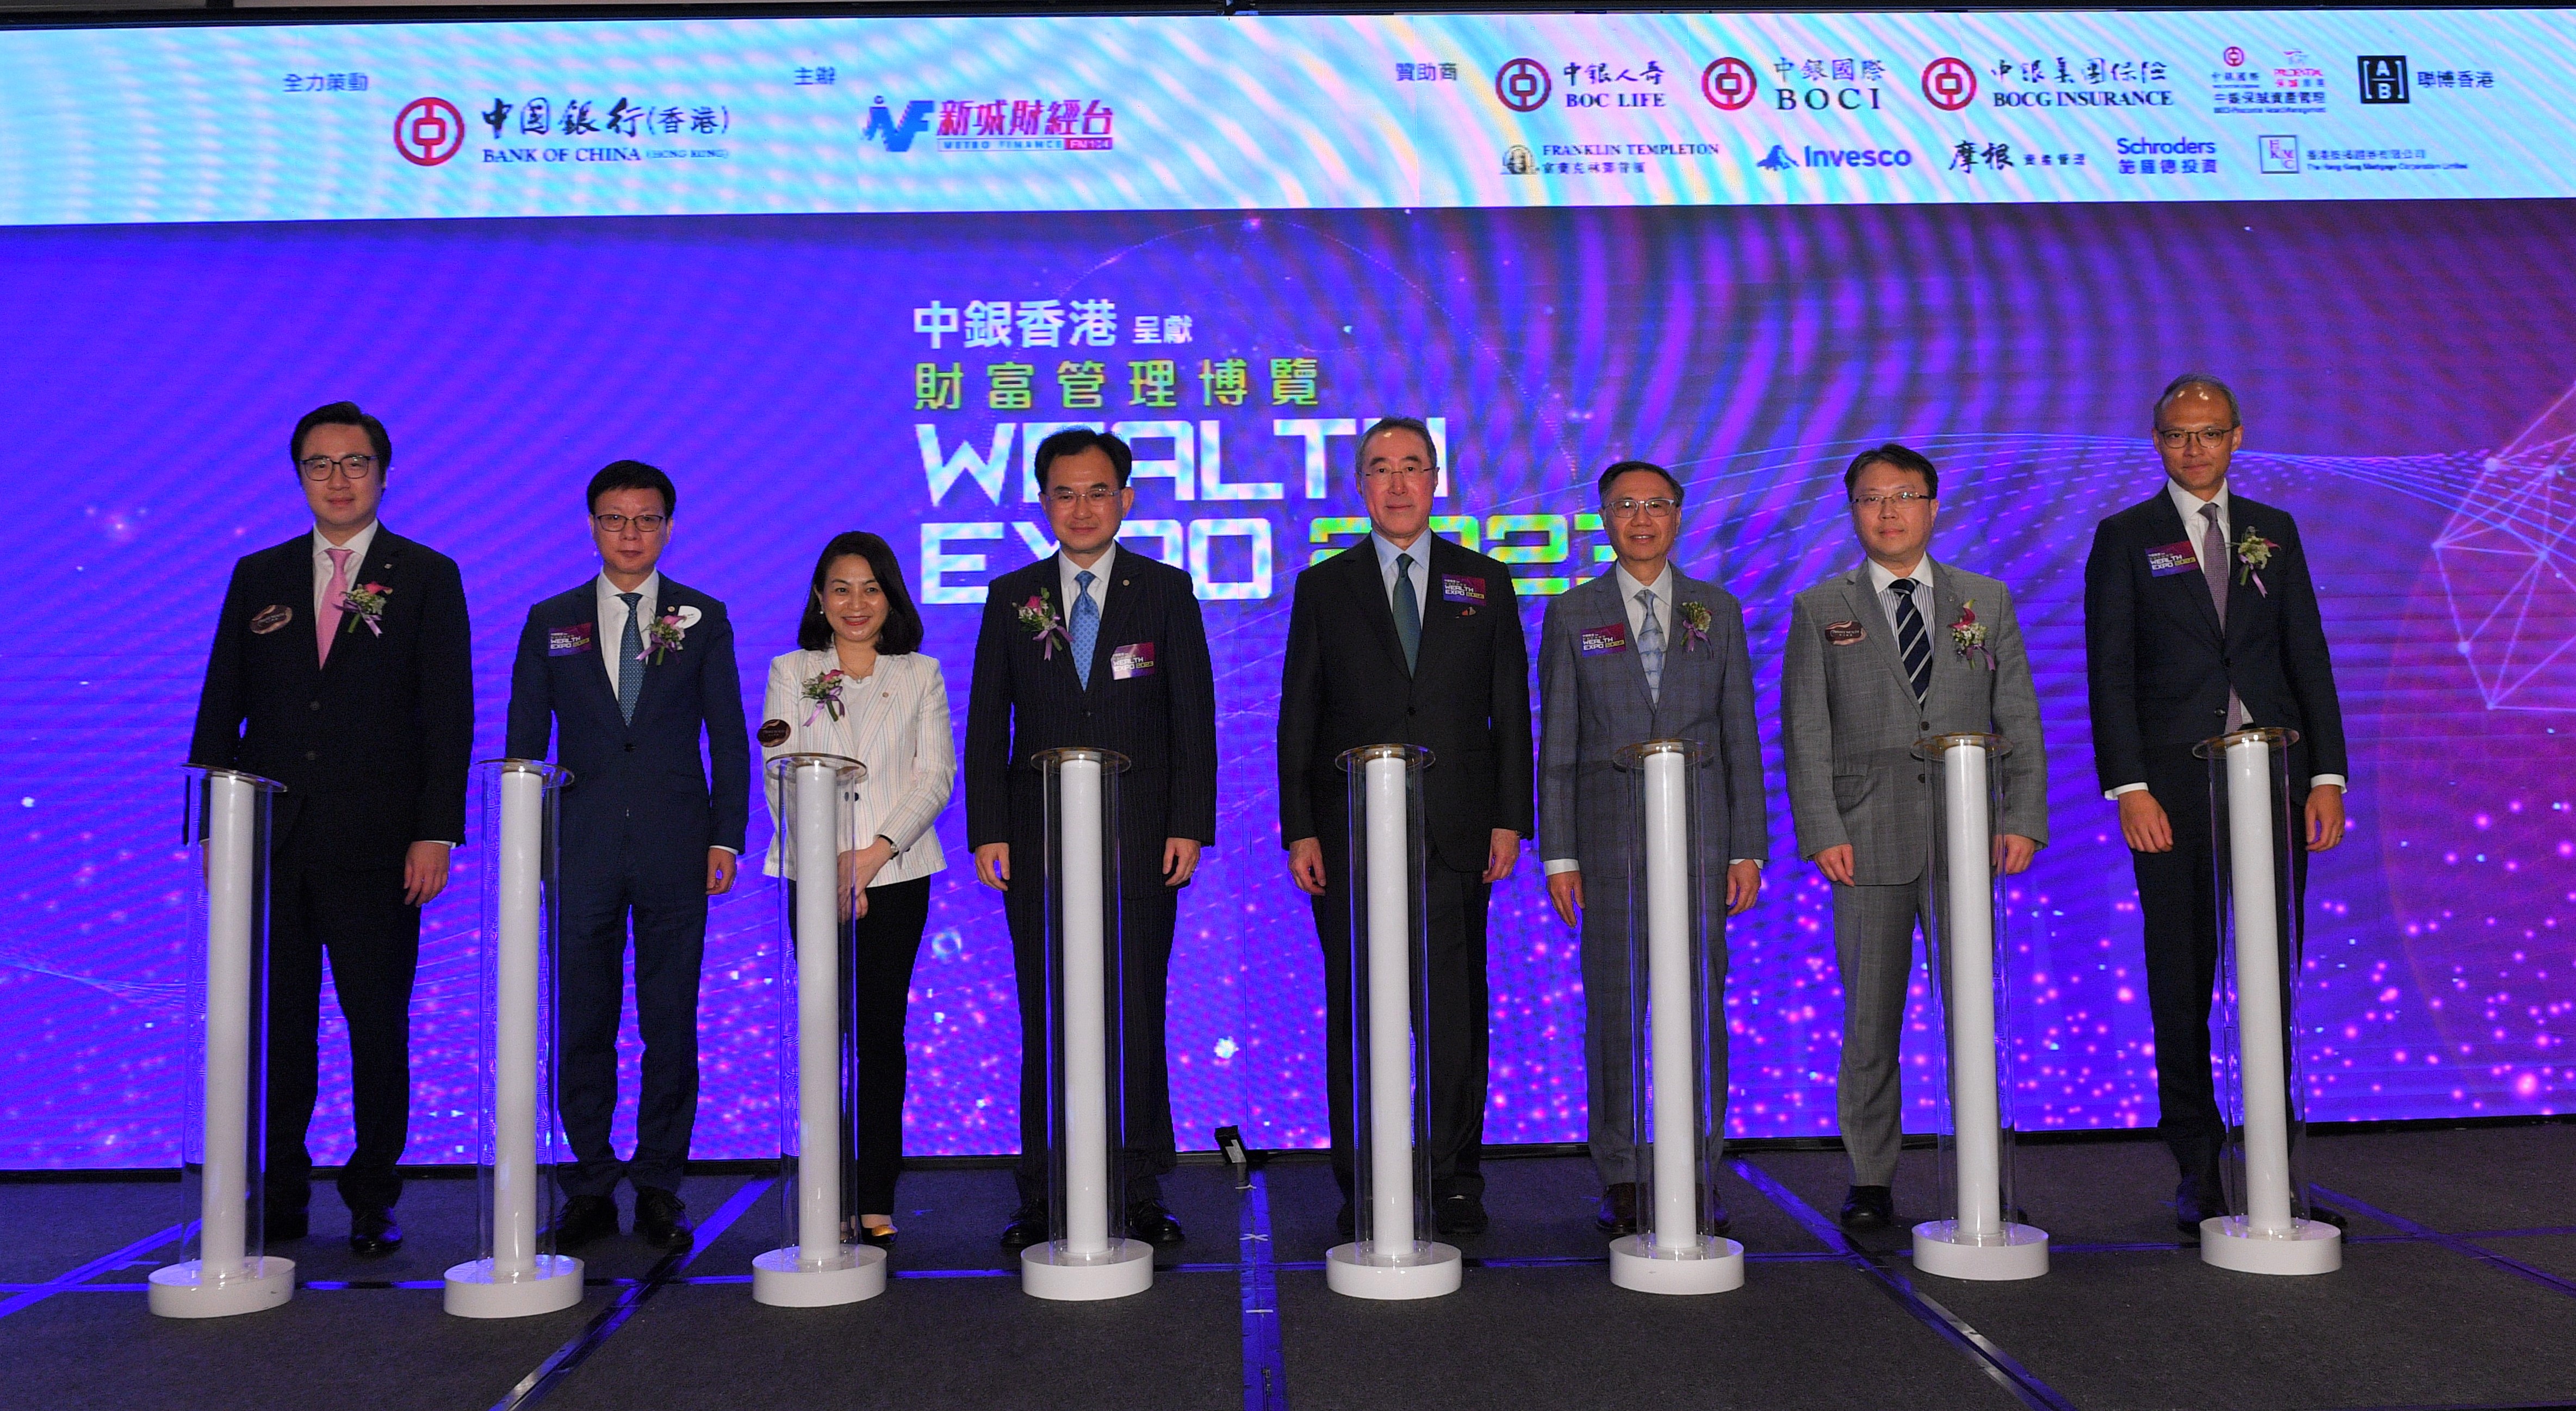 1. The Honourable Henry Tang Ying-yen, GBM, GBS, JP, together with the management of Bank of China (Hong Kong) and Metro Finance FM 104 officiated at the opening ceremony of the Wealth Management Expo 2023.